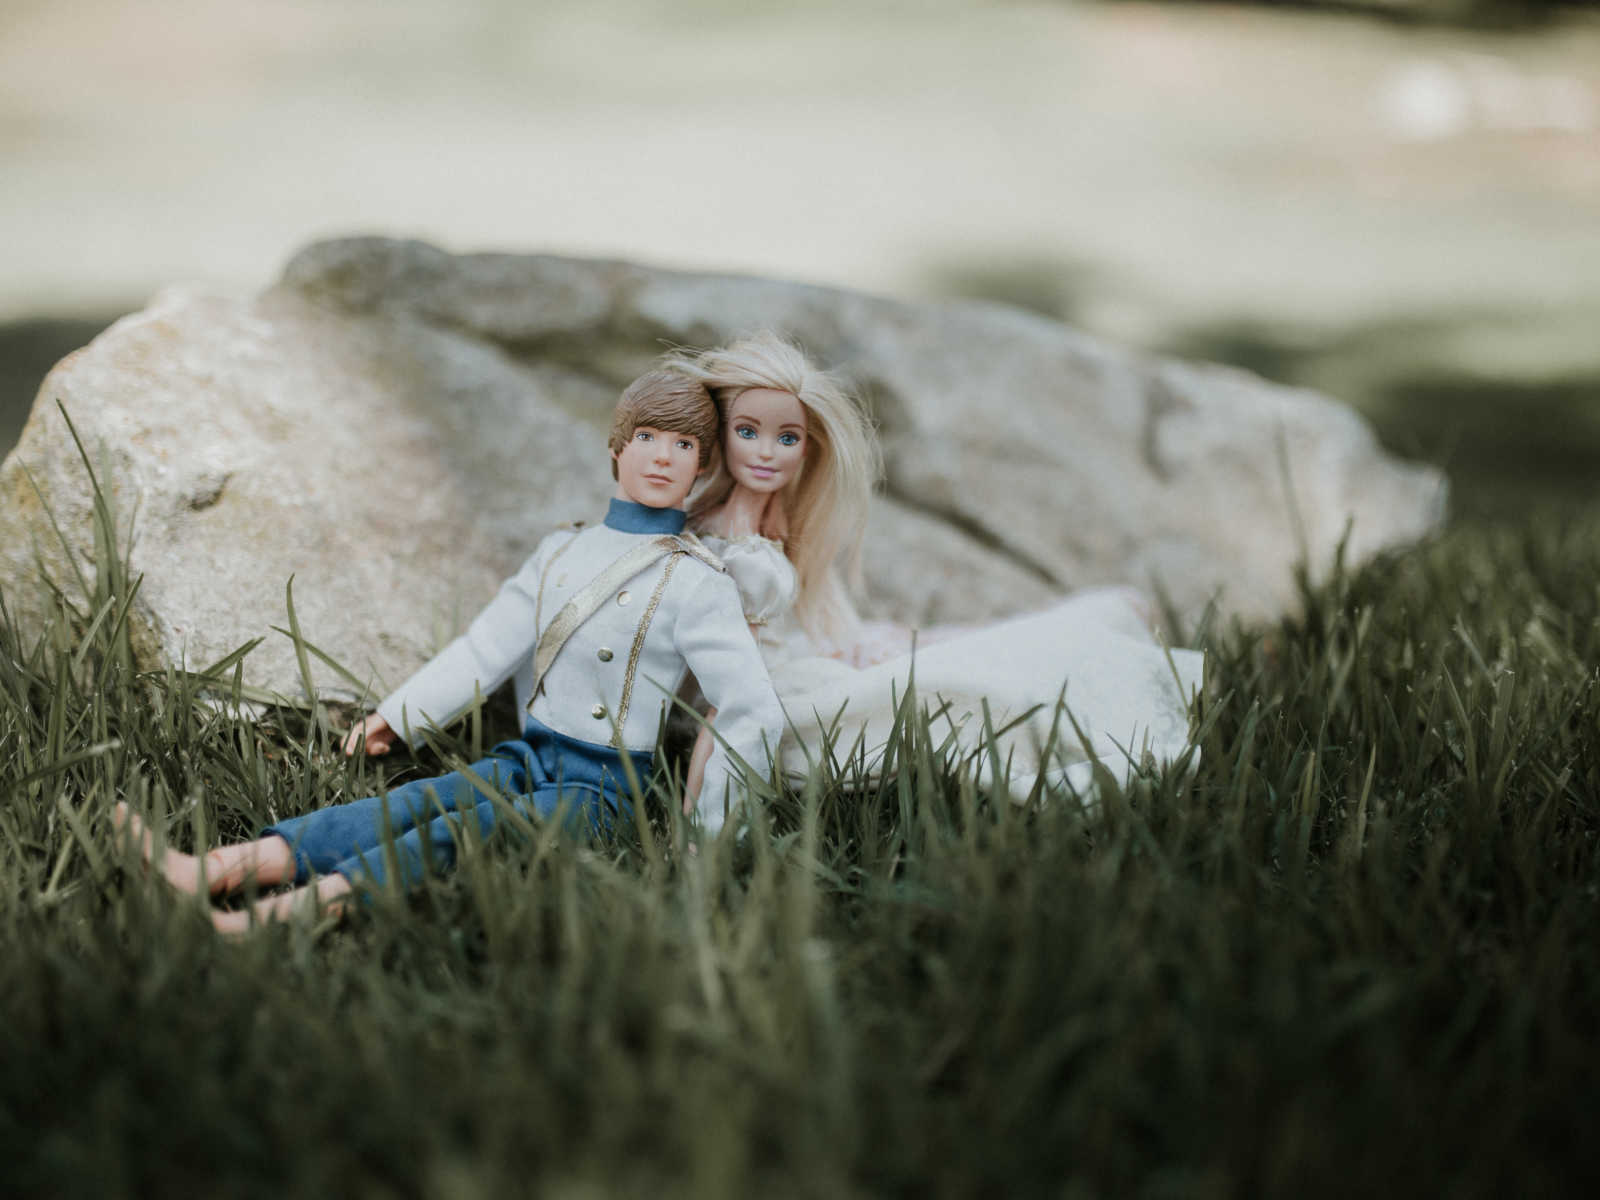 ken and barbie sitting in the grass leaning on each other in front of rock